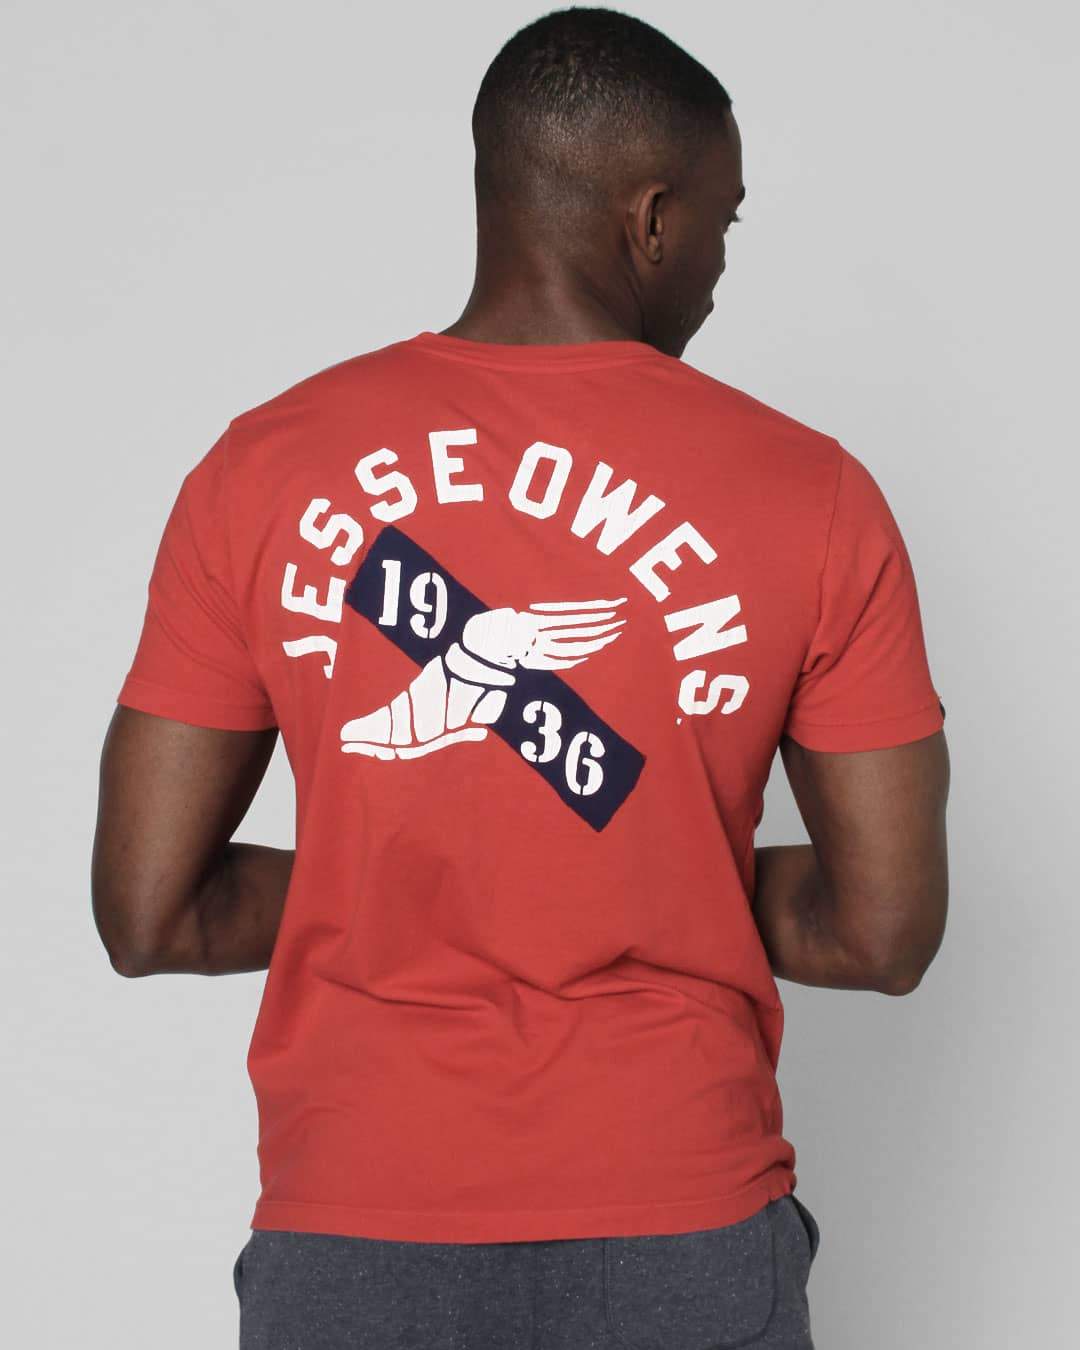 Jesse Owens Ground Breakers Red Tee - Roots of Inc dba Roots of Fight